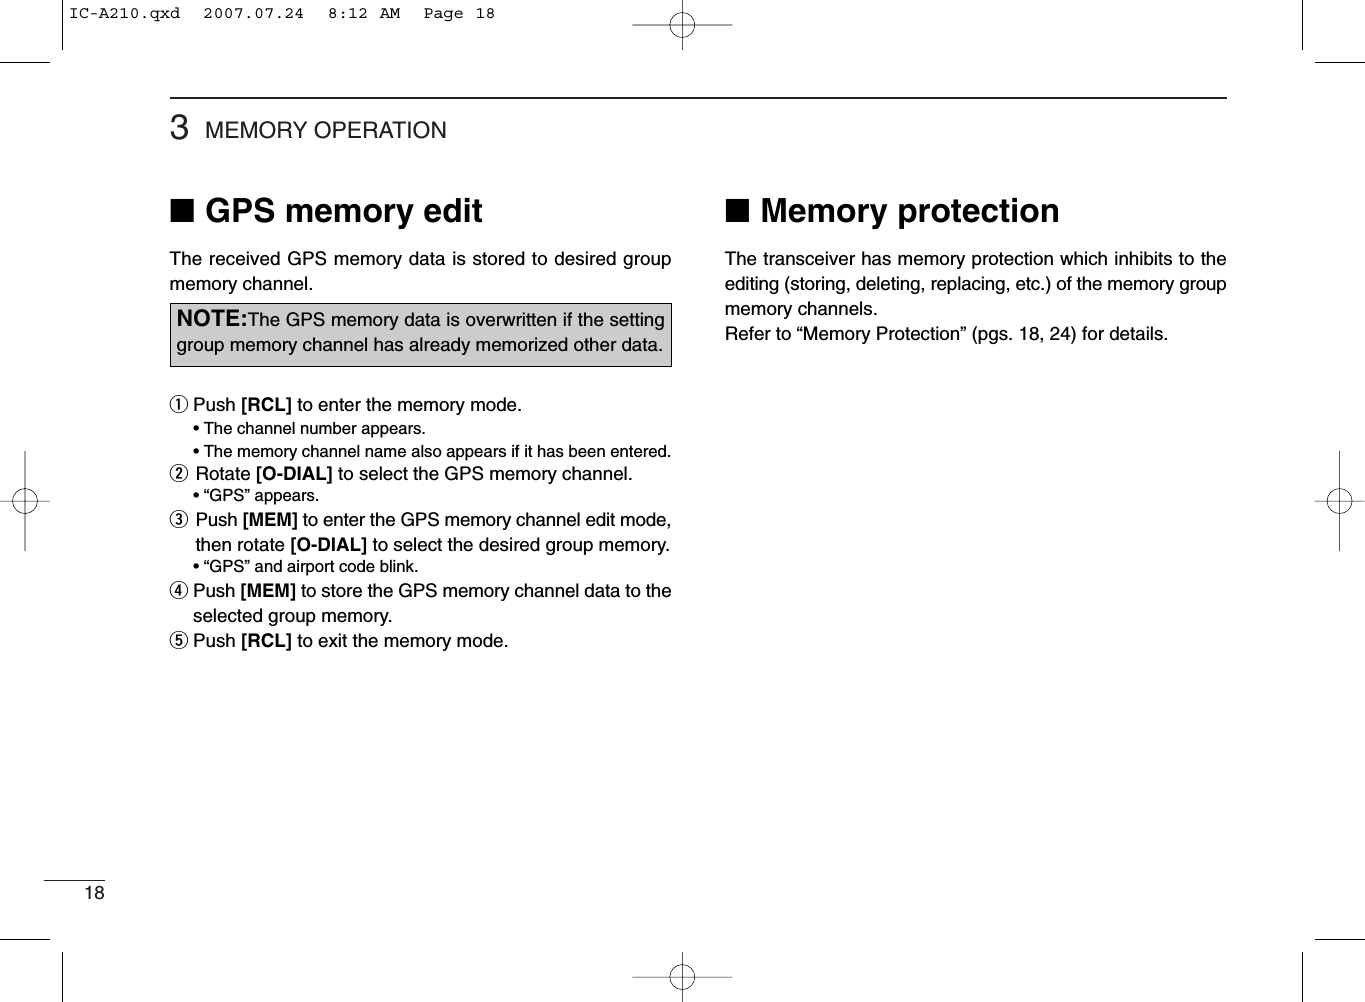 183MEMORY OPERATION■GPS memory editThe received GPS memory data is stored to desired groupmemory channel.qPush [RCL] to enter the memory mode.• The channel number appears.• The memory channel name also appears if it has been entered.wRotate [O-DIAL] to select the GPS memory channel.• “GPS” appears.ePush [MEM] to enter the GPS memory channel edit mode,then rotate [O-DIAL] to select the desired group memory.• “GPS” and airport code blink.rPush [MEM] to store the GPS memory channel data to theselected group memory.tPush [RCL] to exit the memory mode.NOTE:The GPS memory data is overwritten if the settinggroup memory channel has already memorized other data.■Memory protectionThe transceiver has memory protection which inhibits to theediting (storing, deleting, replacing, etc.) of the memory groupmemory channels.Refer to “Memory Protection” (pgs. 18, 24) for details.IC-A210.qxd  2007.07.24  8:12 AM  Page 18